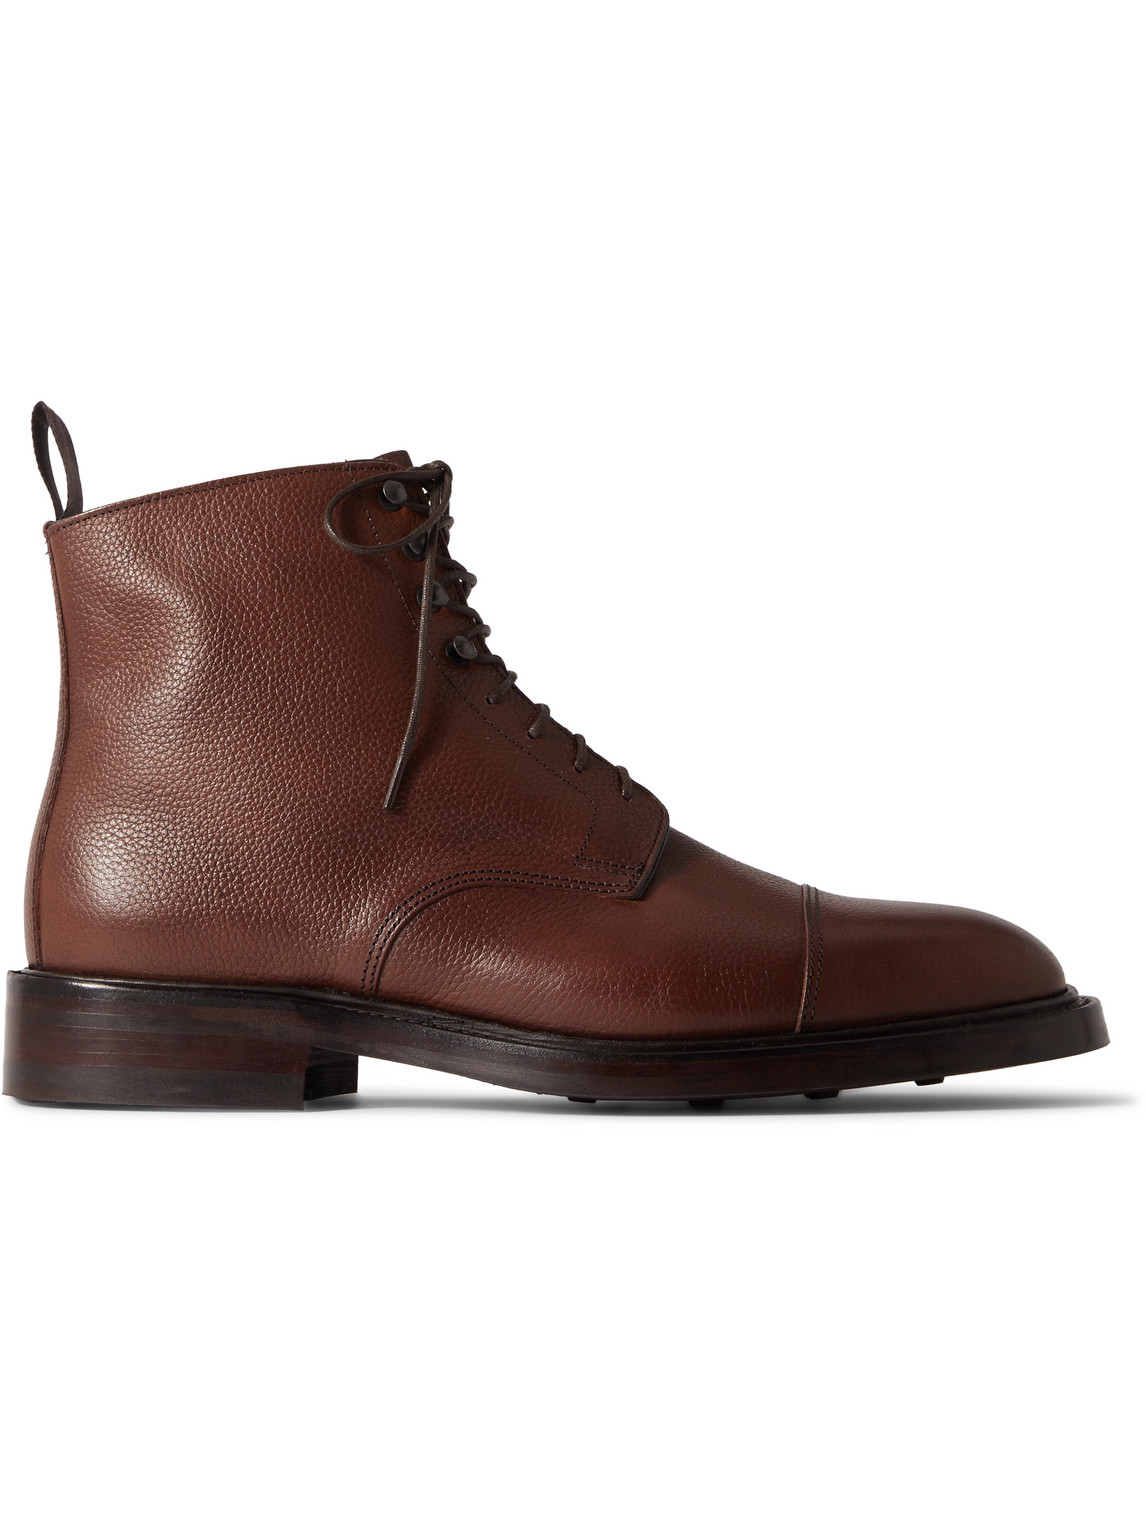 Kingsman George Cleverley Taron Cap-toe Pebble-grain Leather Boots In Brown